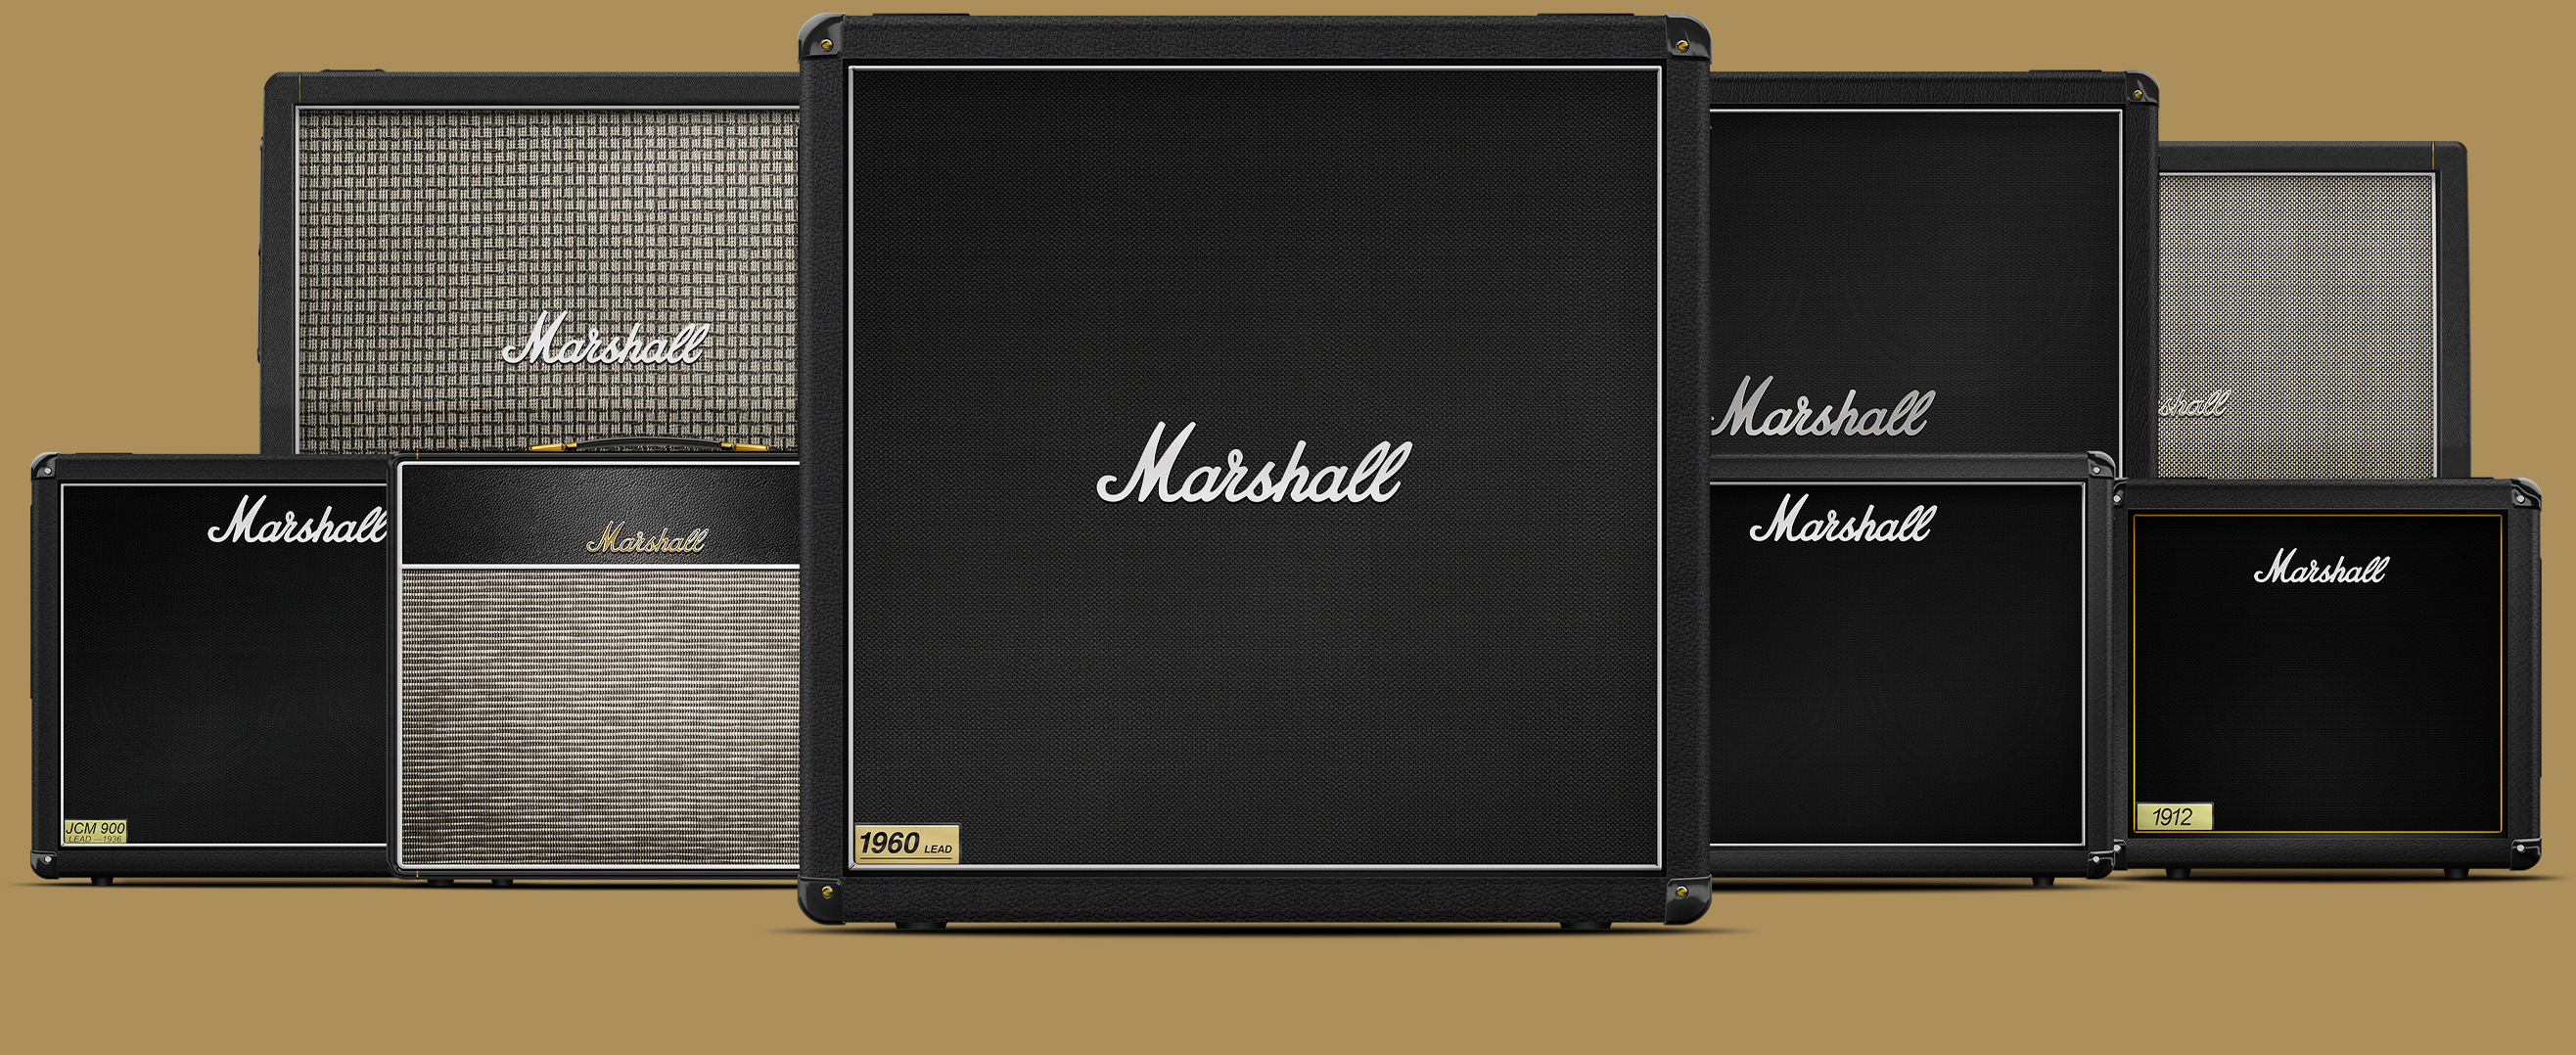 amp-room-marshall-suite-whats-included-marshall-cabinet-collection-3.jpg